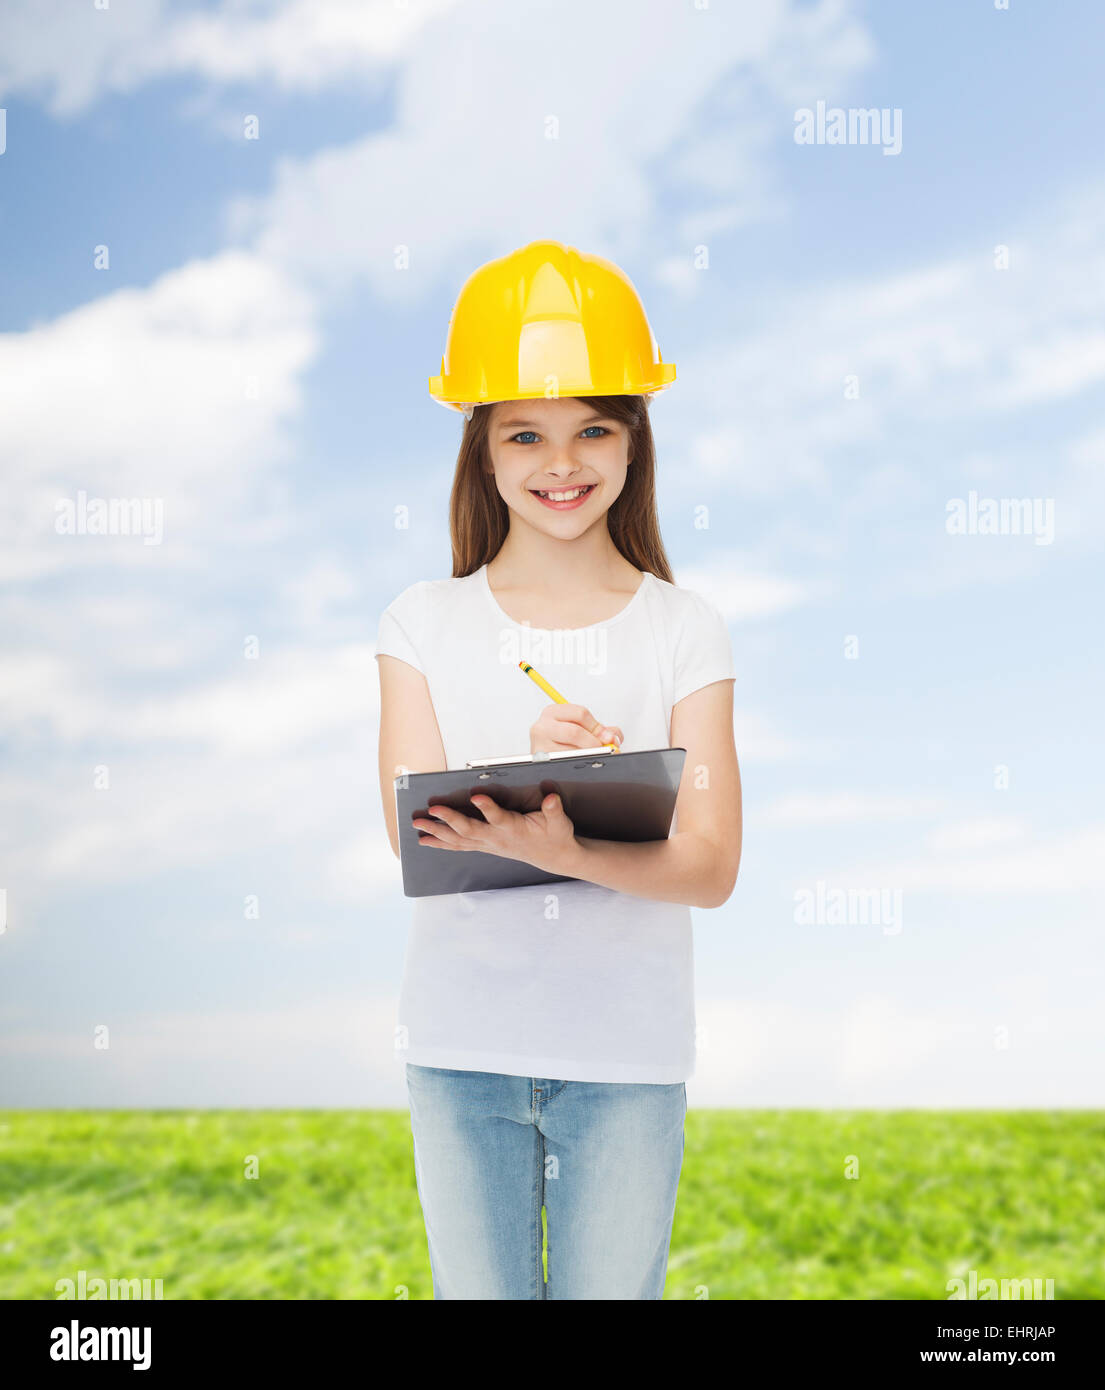 smiling little girl in hardhat with clipboard Stock Photo